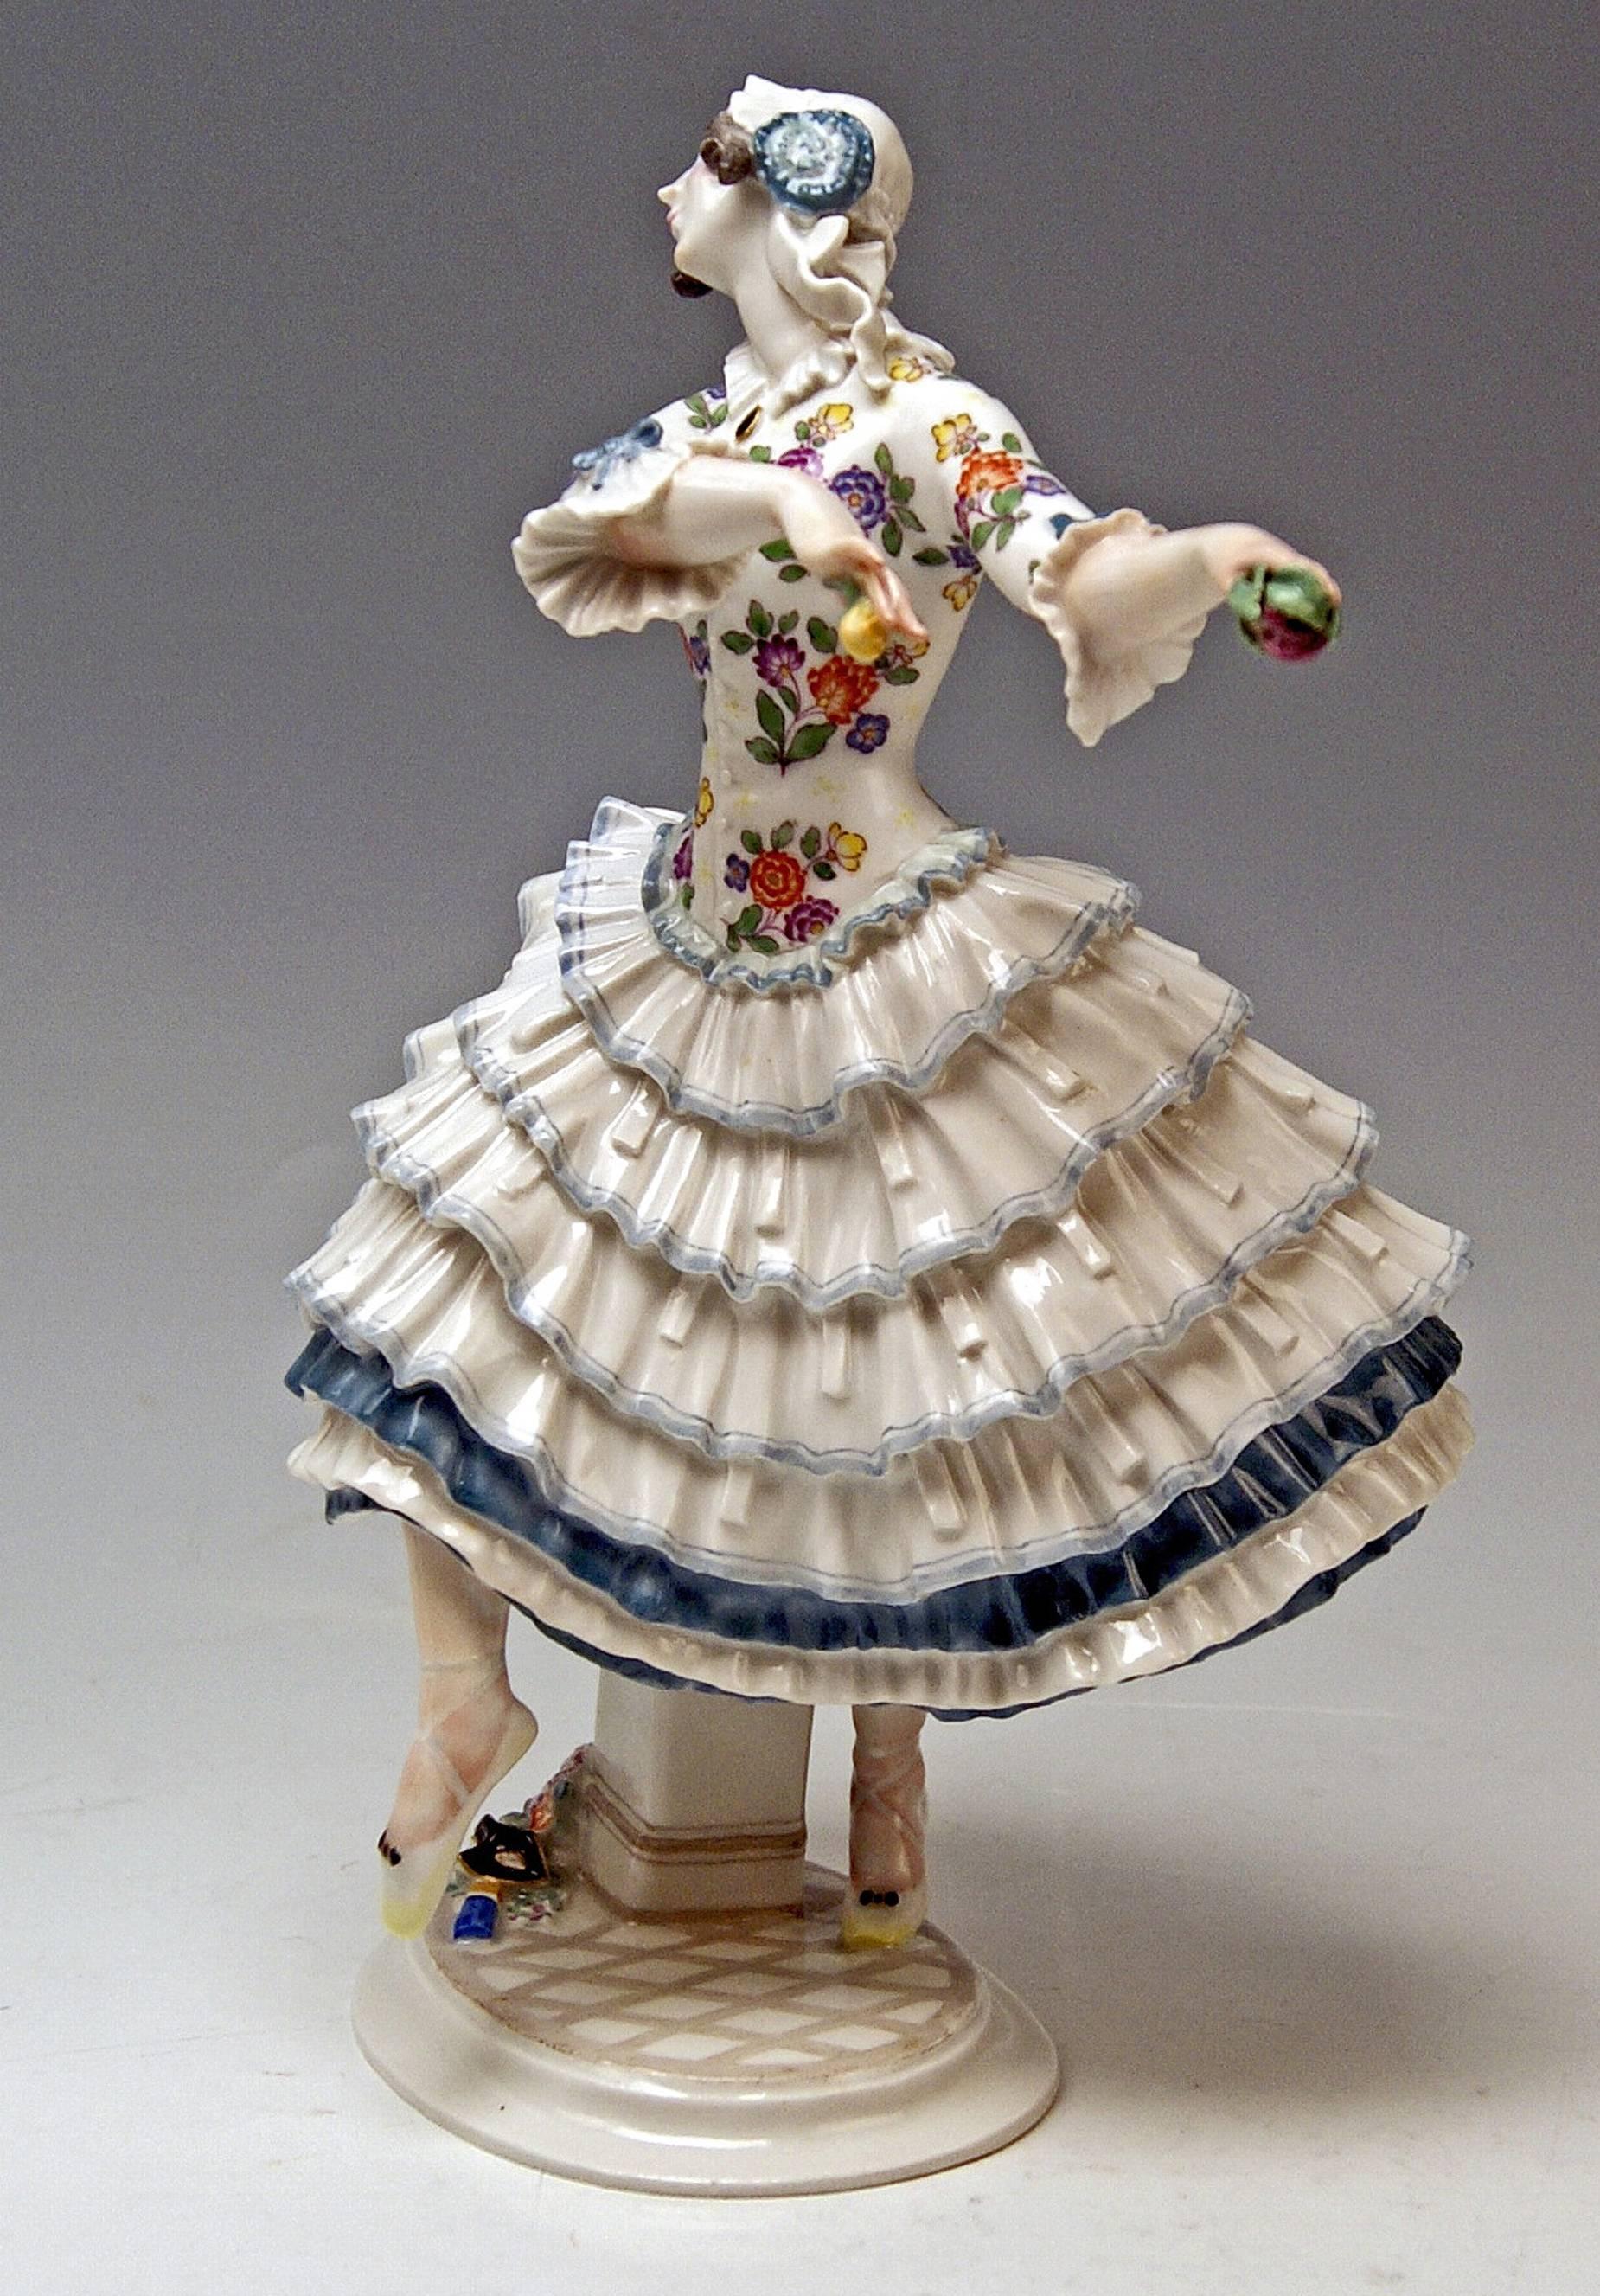 Meissen gorgeous figurine of dancing lady:
Chiarina of Russian Ballet, created by Paul Scheurich 
 
Manufactory: Meissen
Hallmarked: Blue Meissen Sword Mark (underglazed)
First quality 
Dating: made circa 1920-1924 
Material: porcelain,